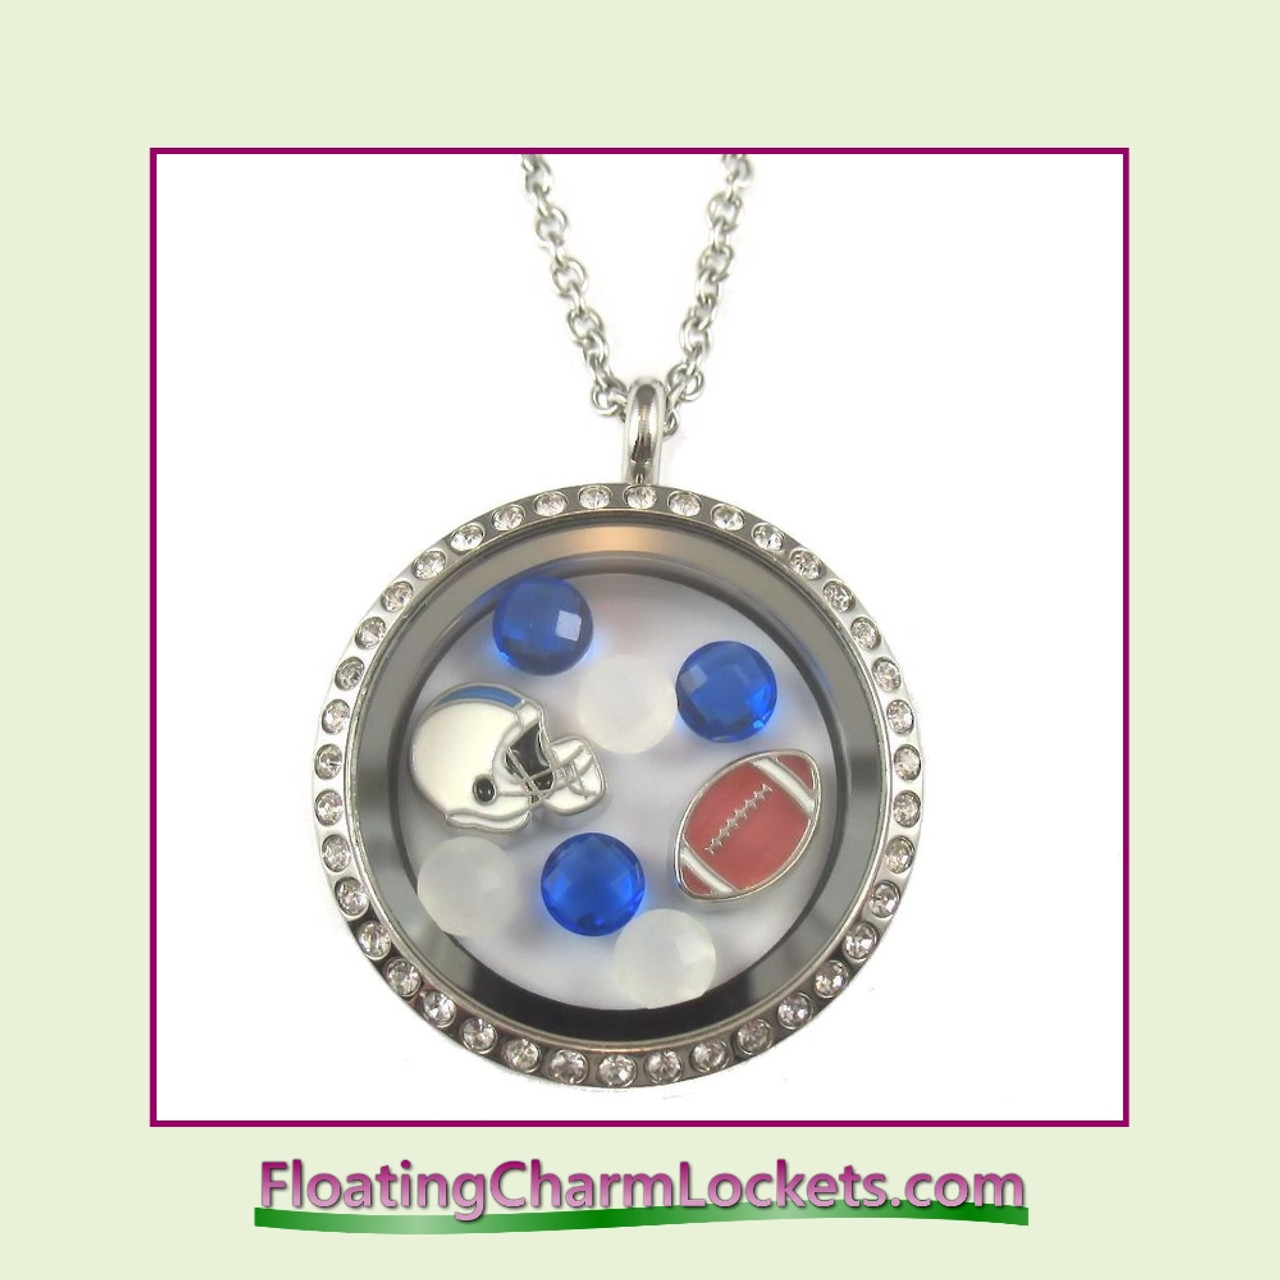 FCL Designs® Indianapolis Football Theme Floating Charm Locket